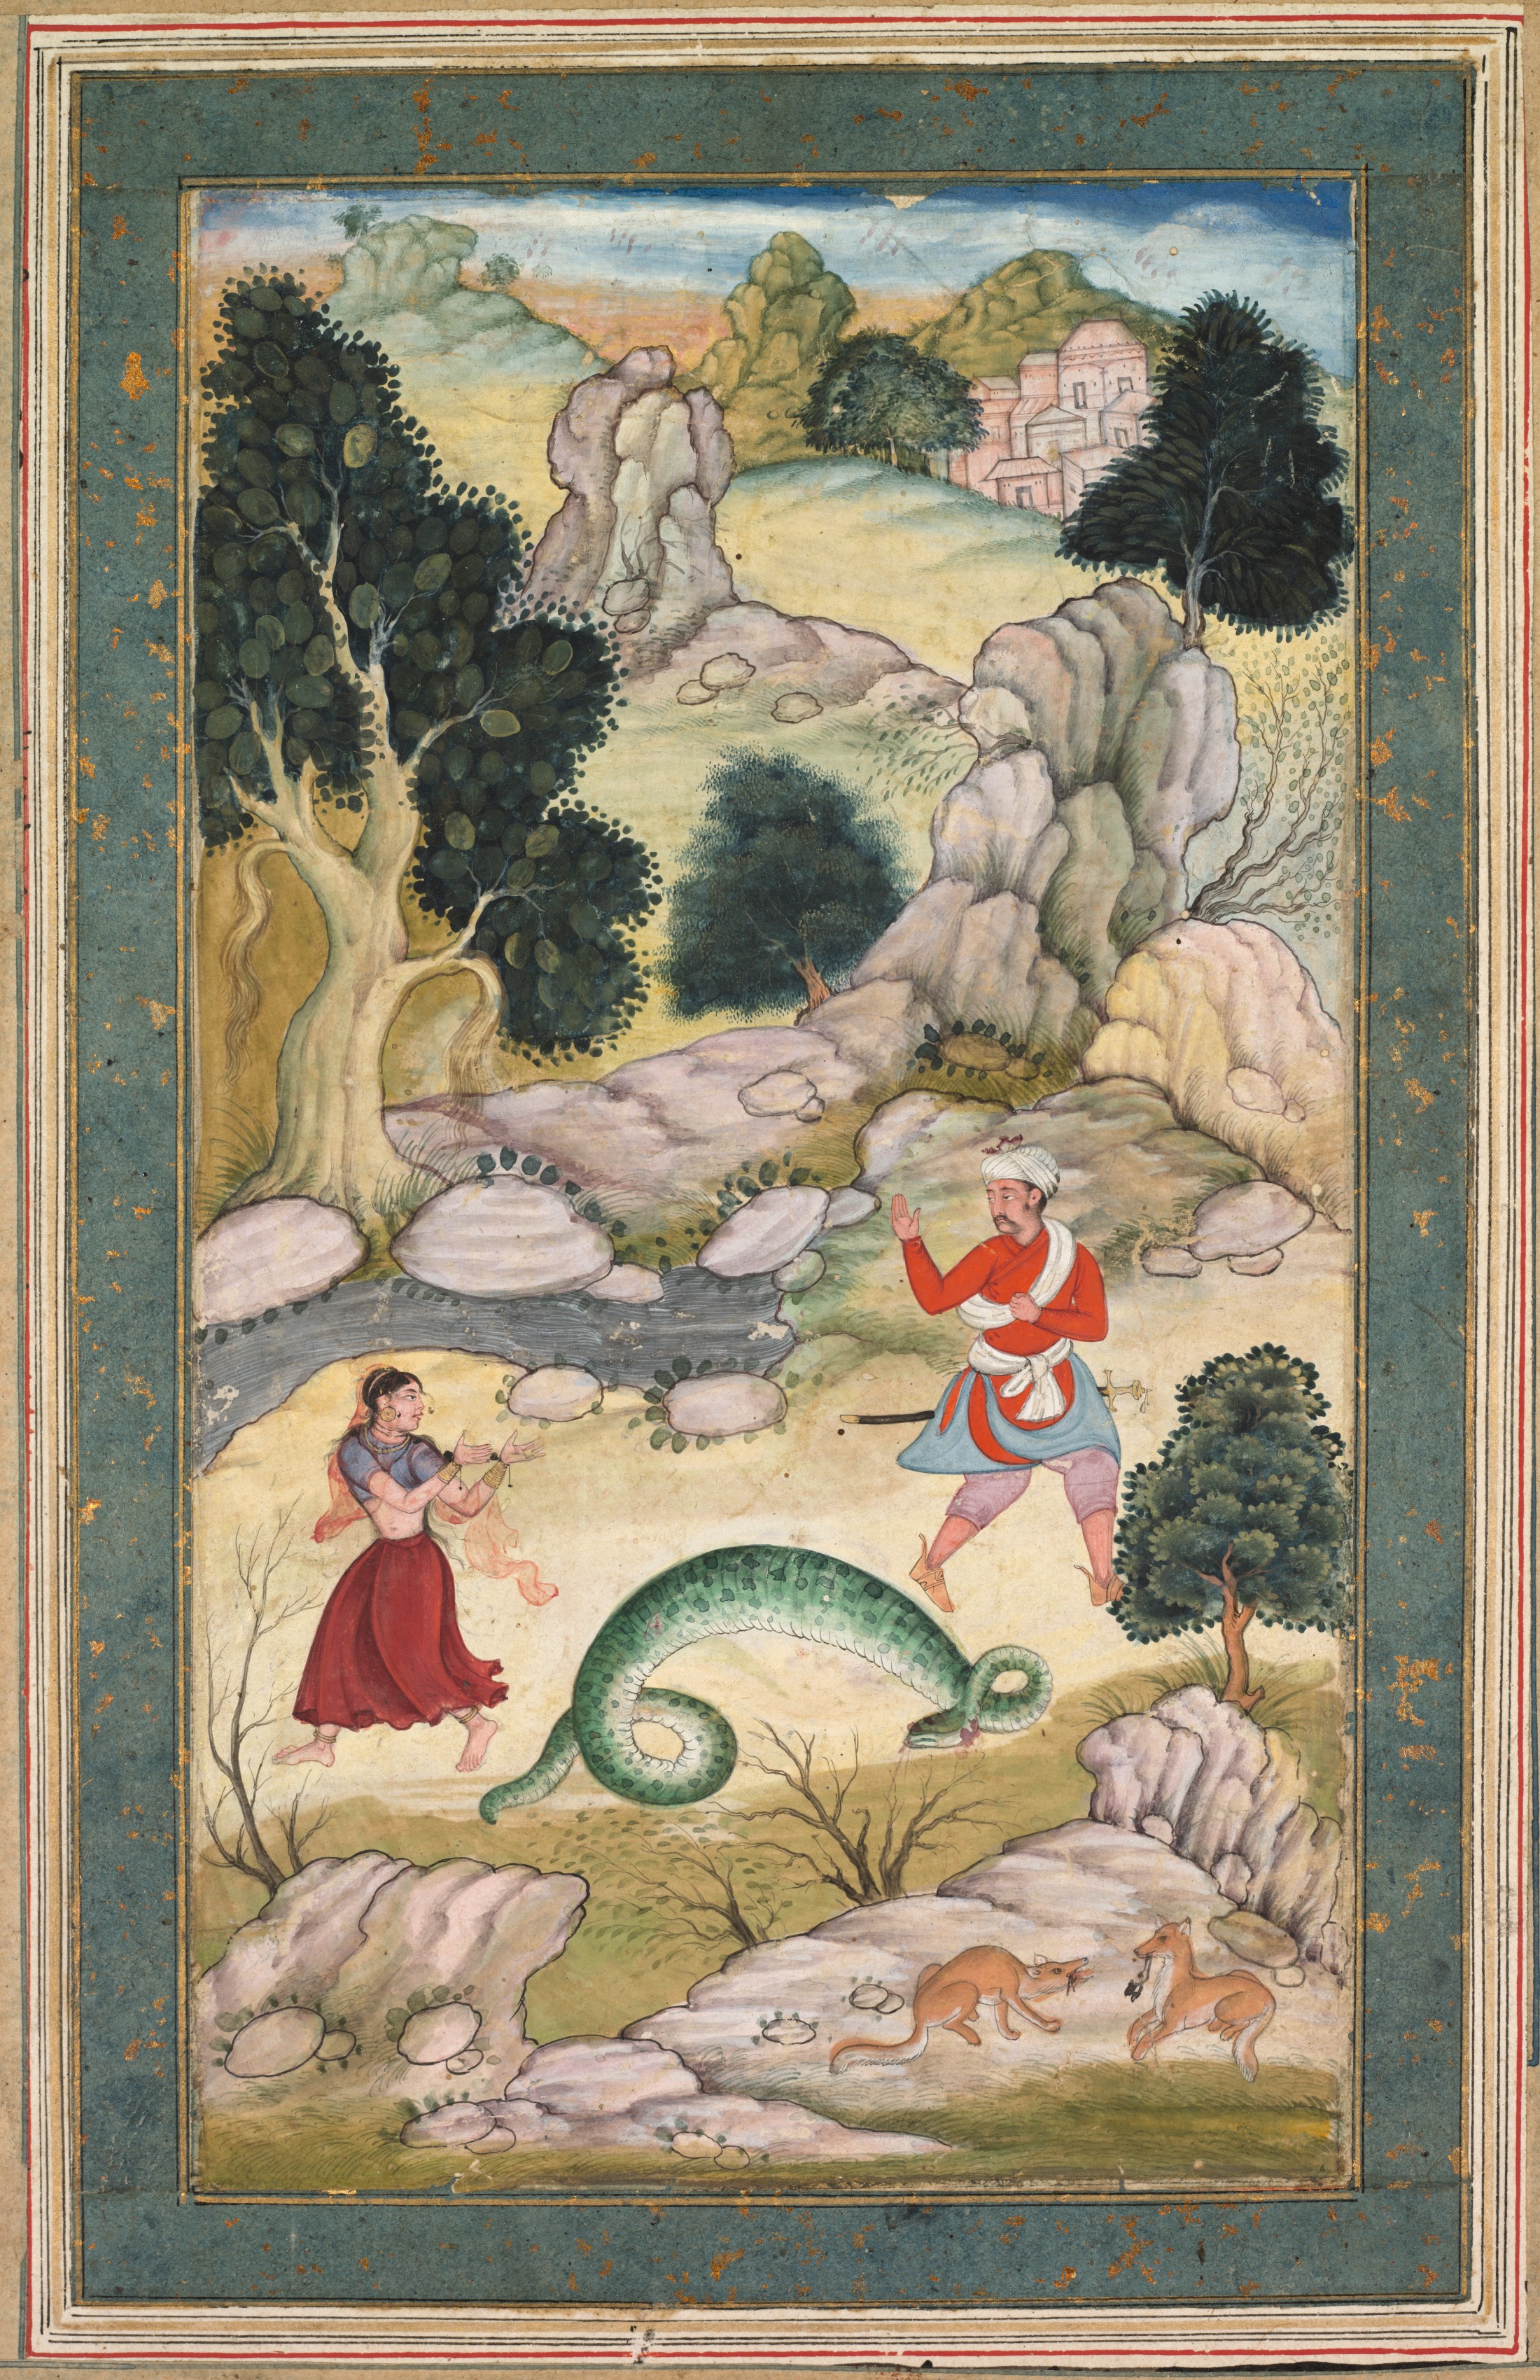 Lovers Parting, Page from a Book of Fables